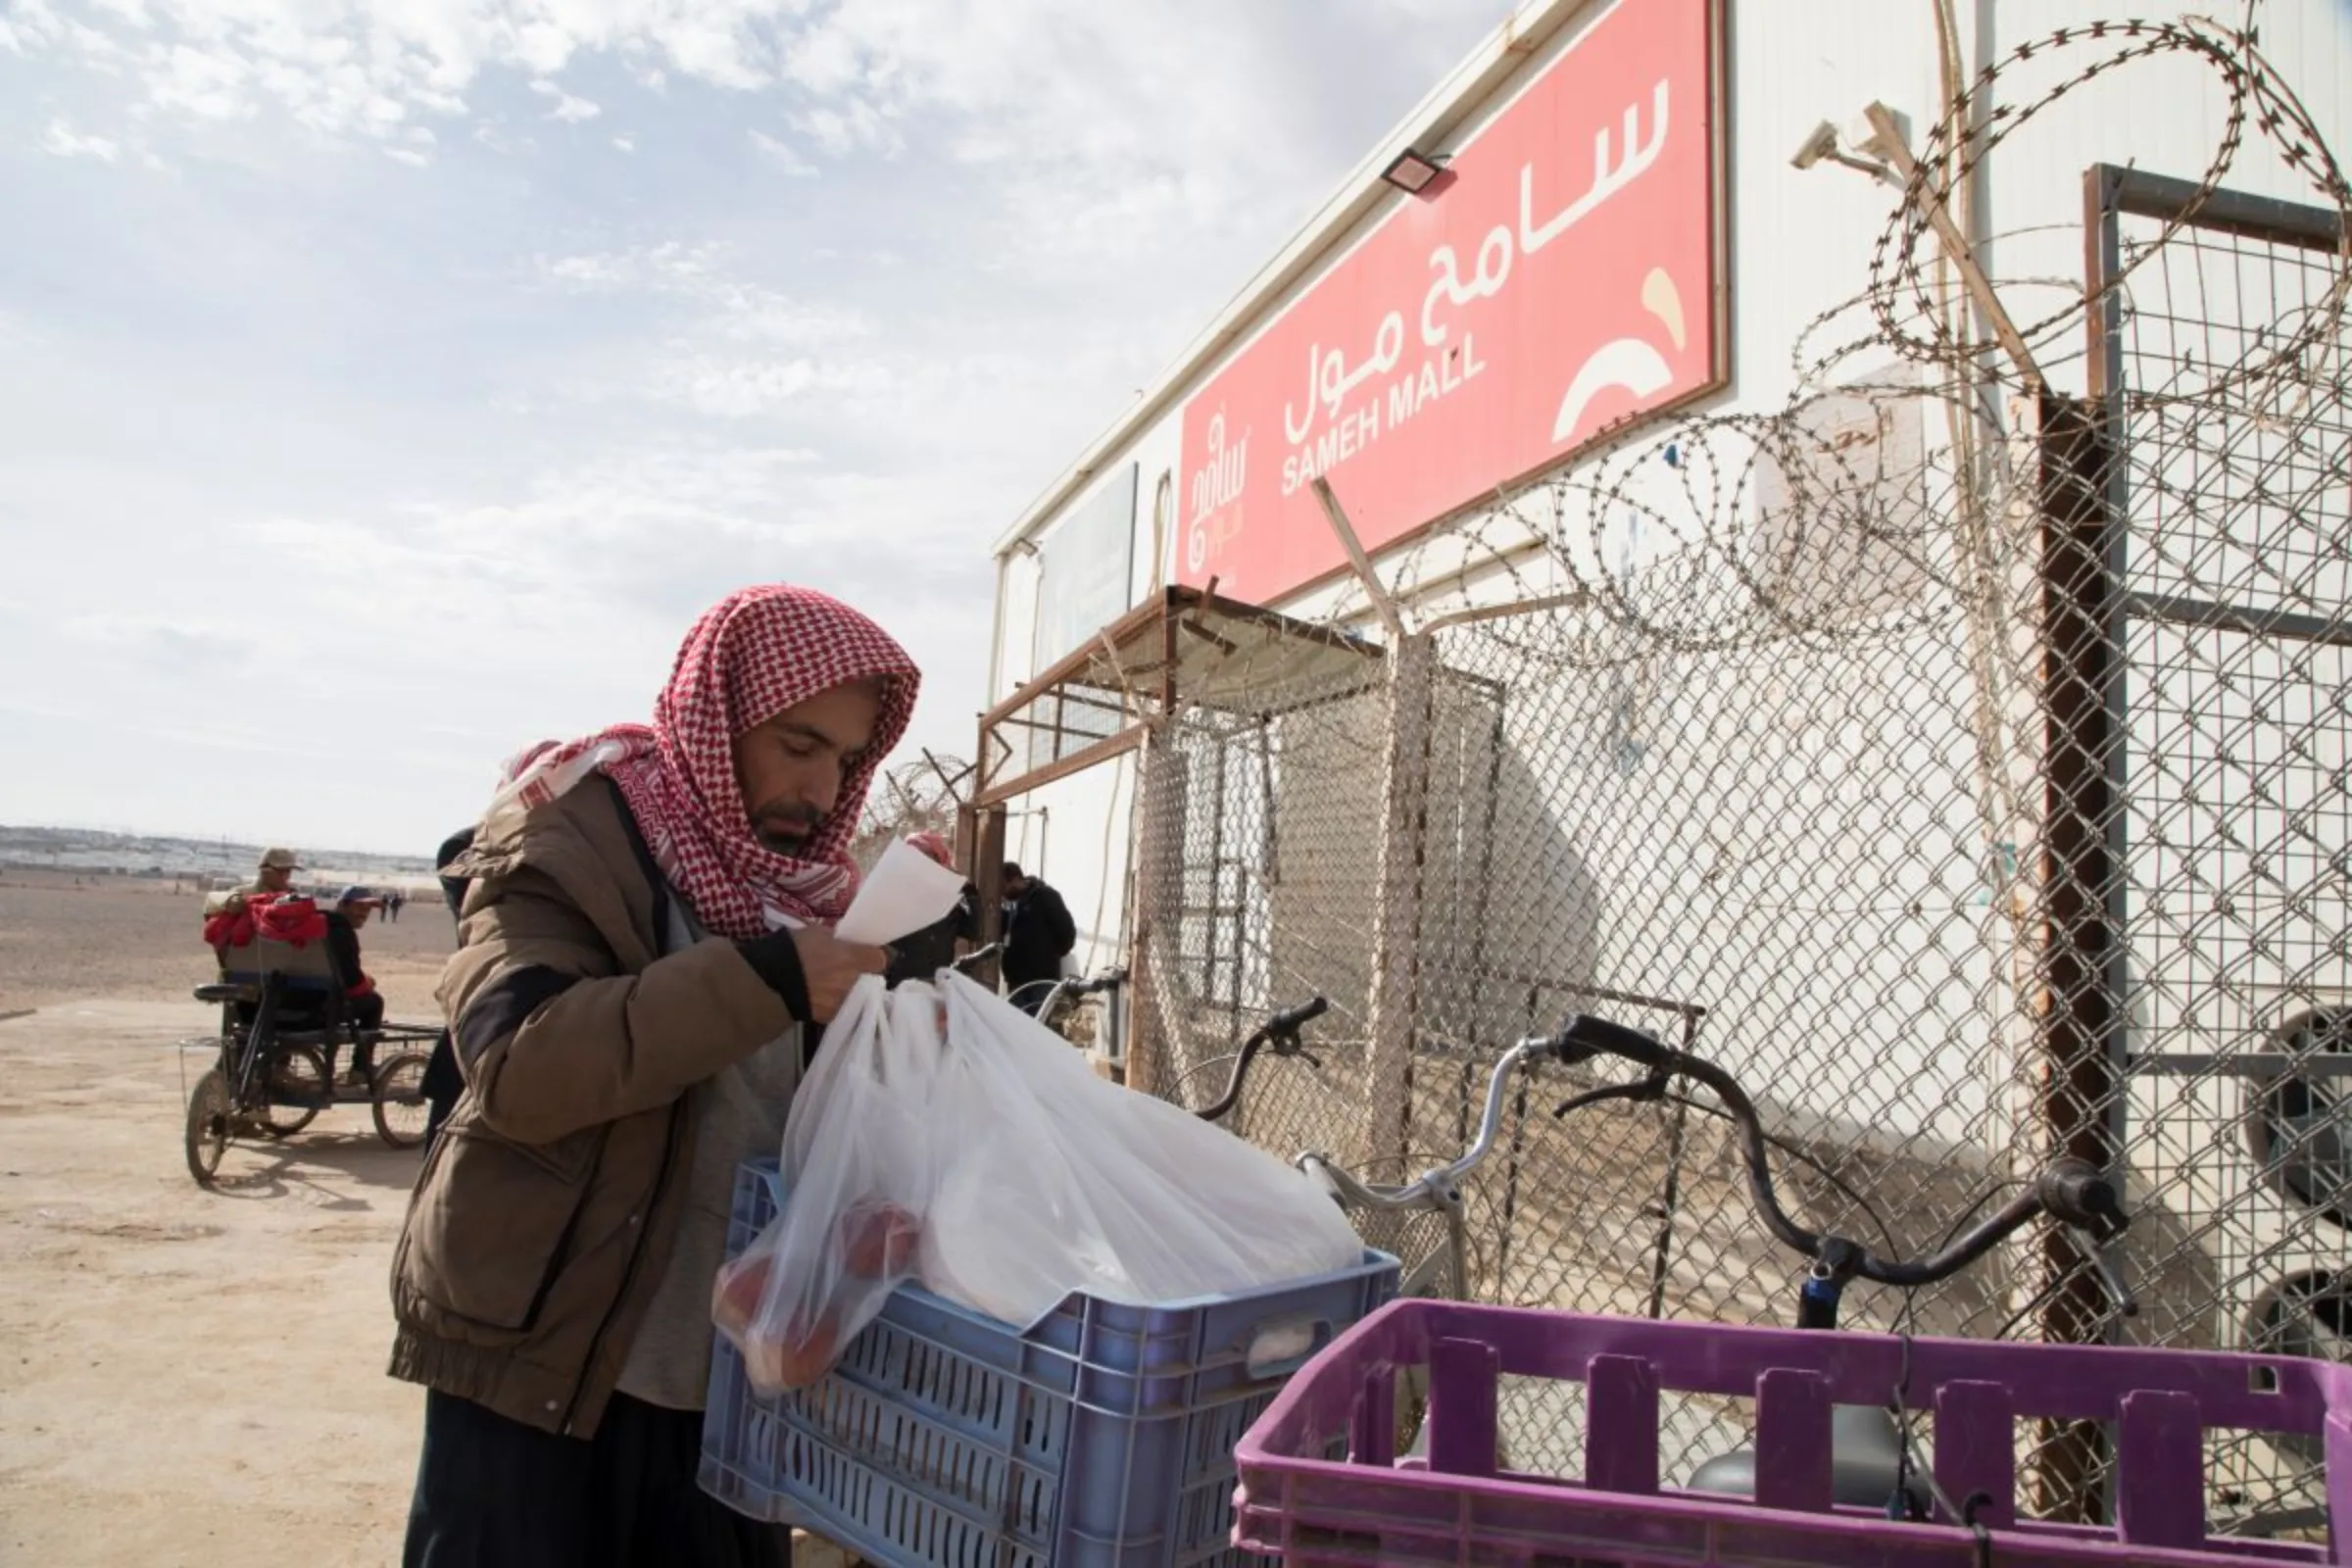 Abedalrazak Ali Mohammad, 41, loads his groceries unto his bicycle outside of Sameh Mall in Azraq, Jordan. November 27, 2022